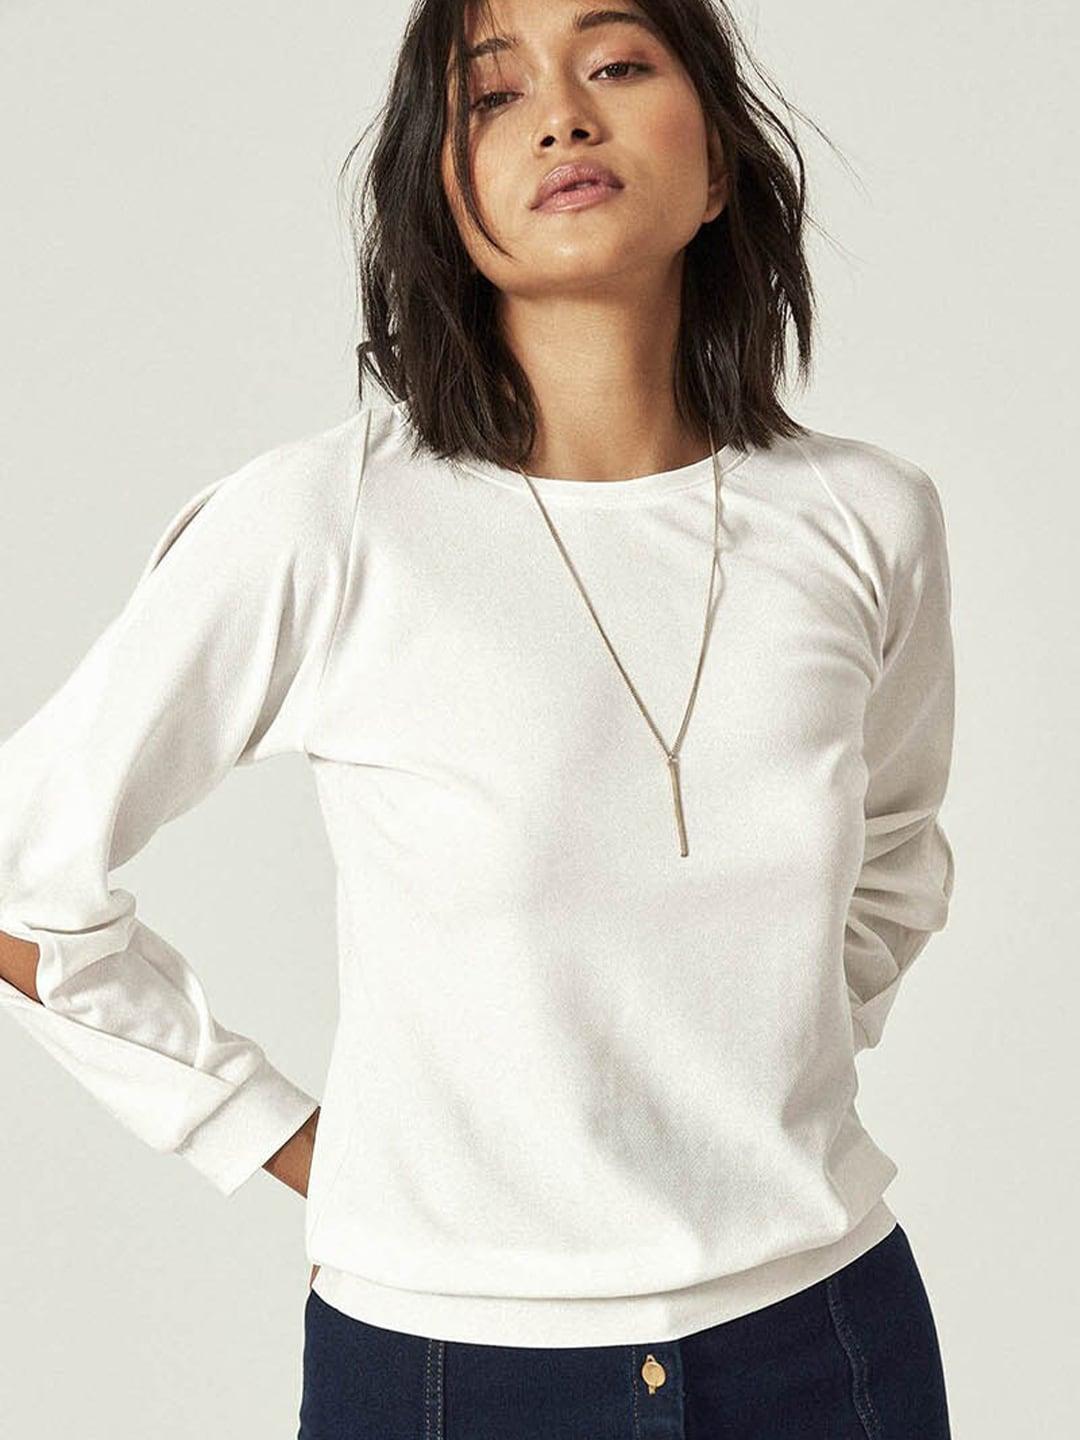 the-label-life-women-white-textured-knit-top